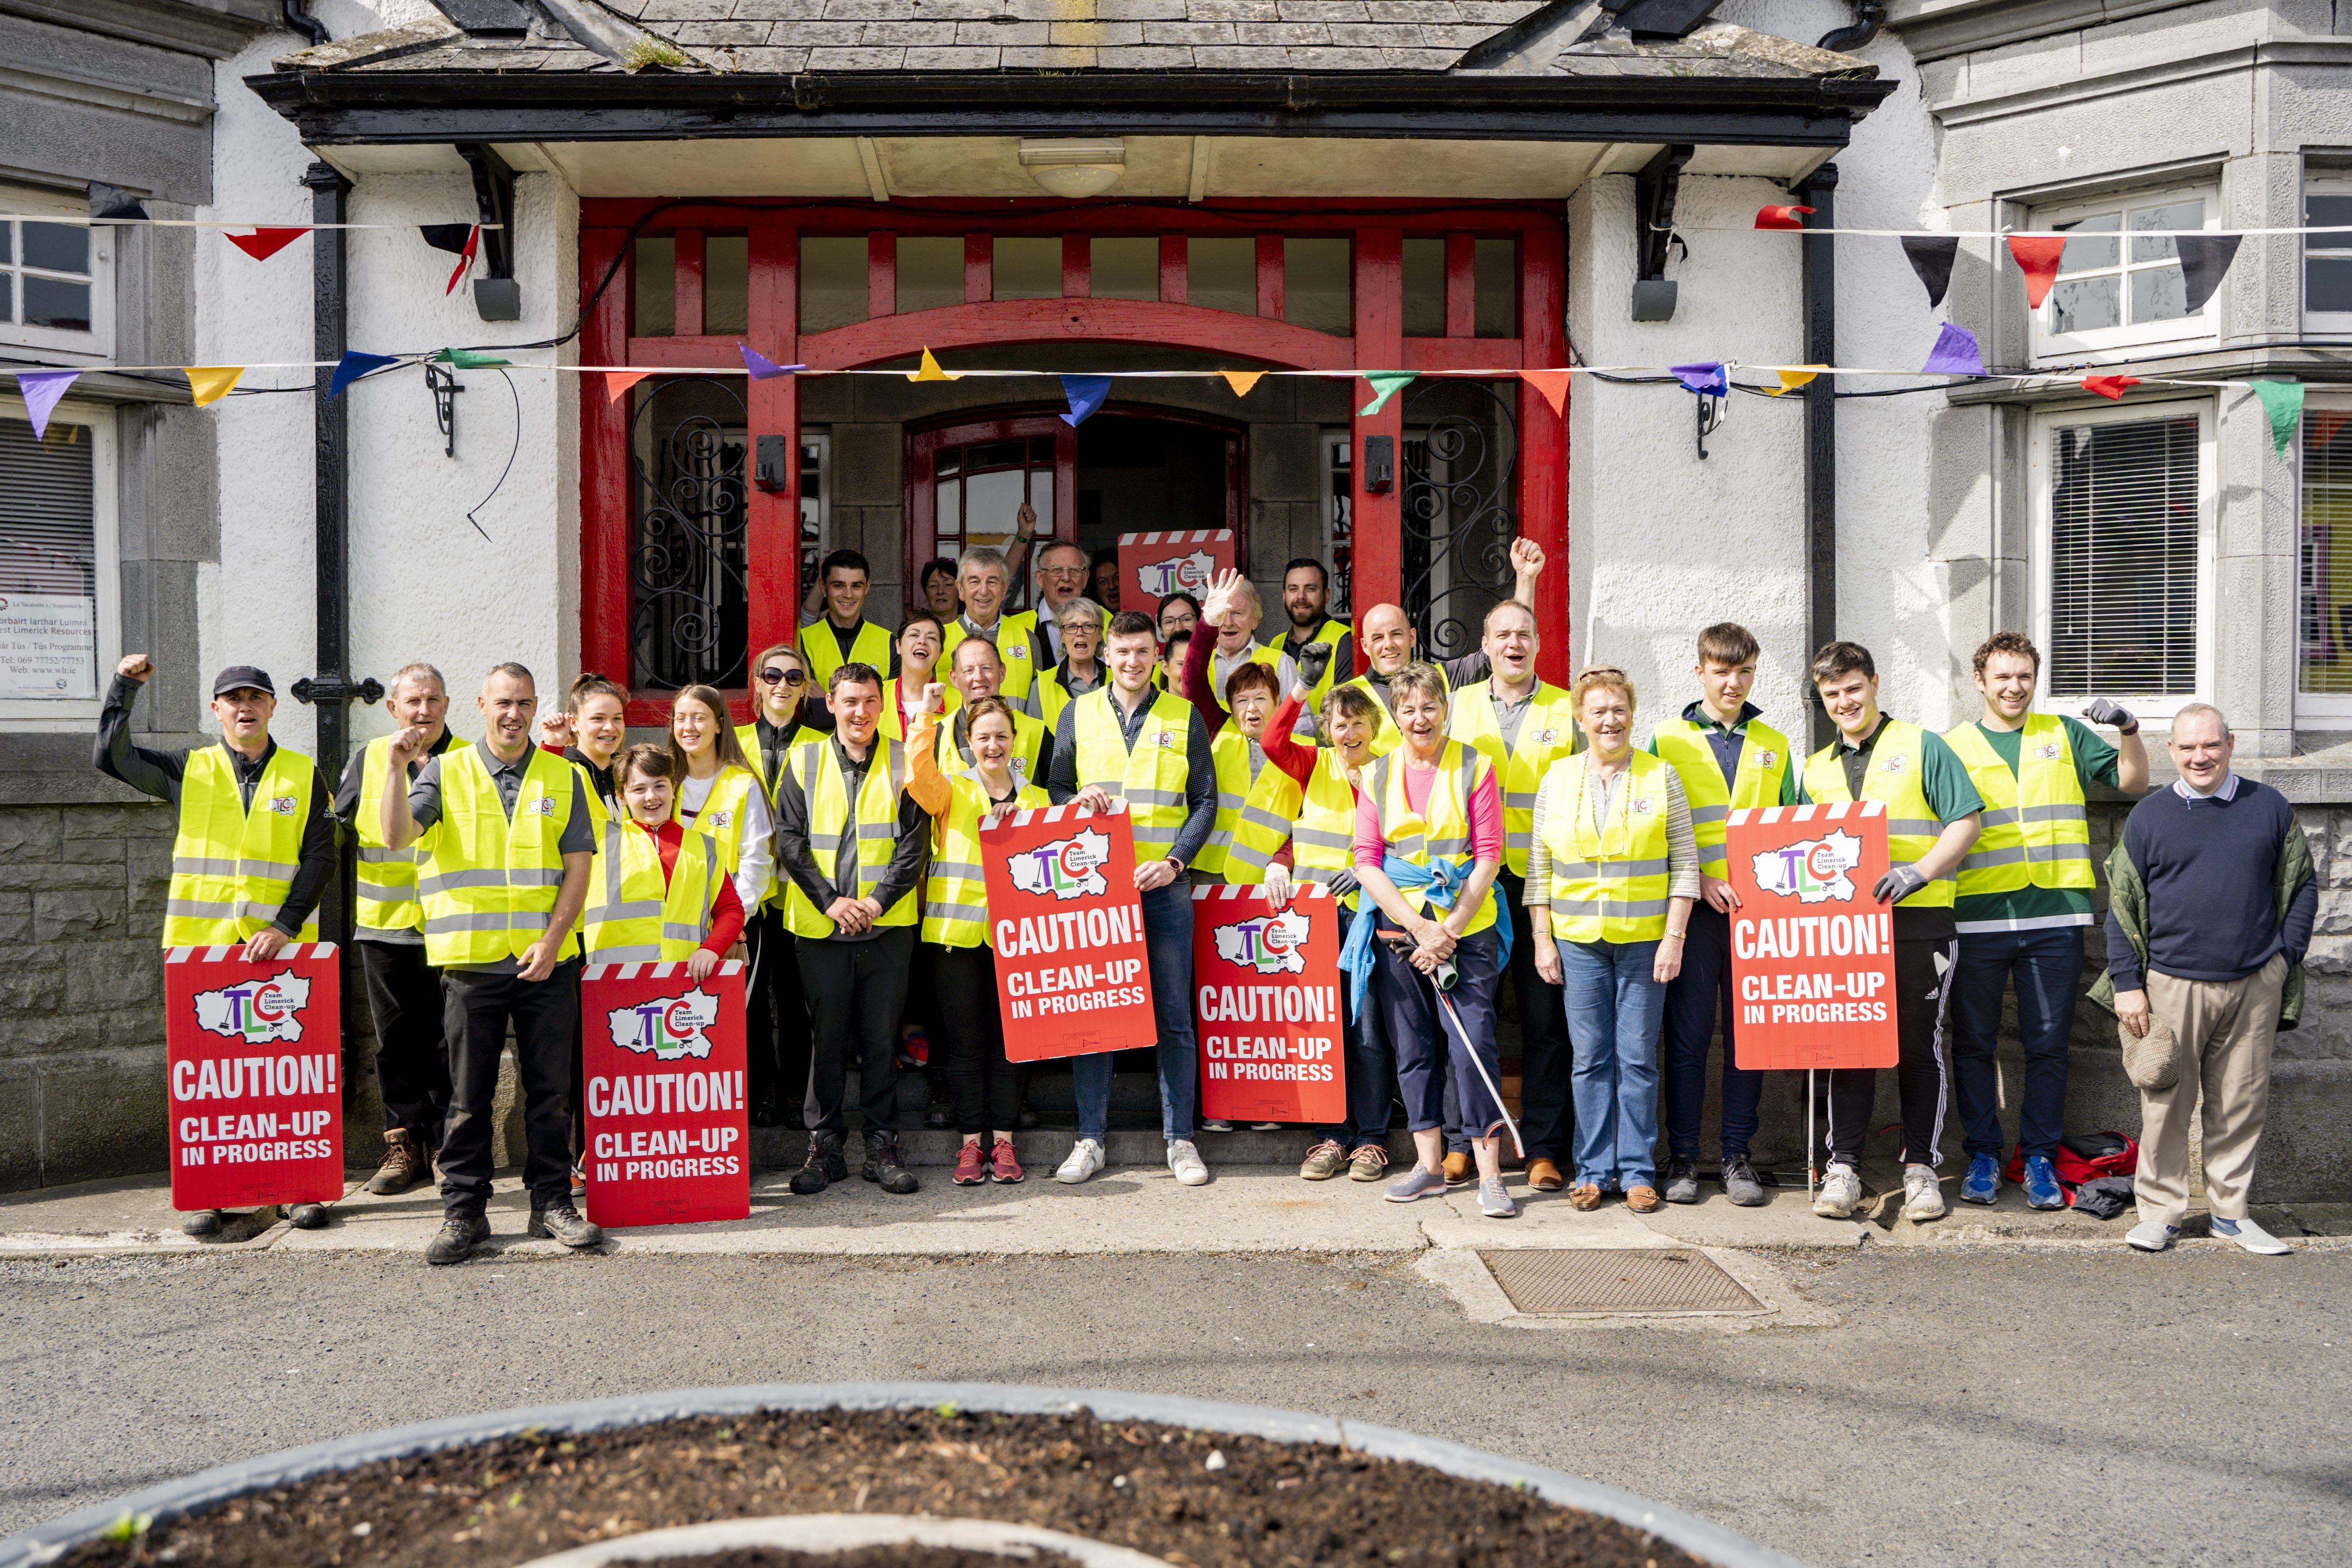 19/04/2019Limerick Hurling Captain, Declan Hannon pictured with volunteers from Adare at The Team Limerick Clean-Up (TLC) in Limerick. Pic: Don Moloney